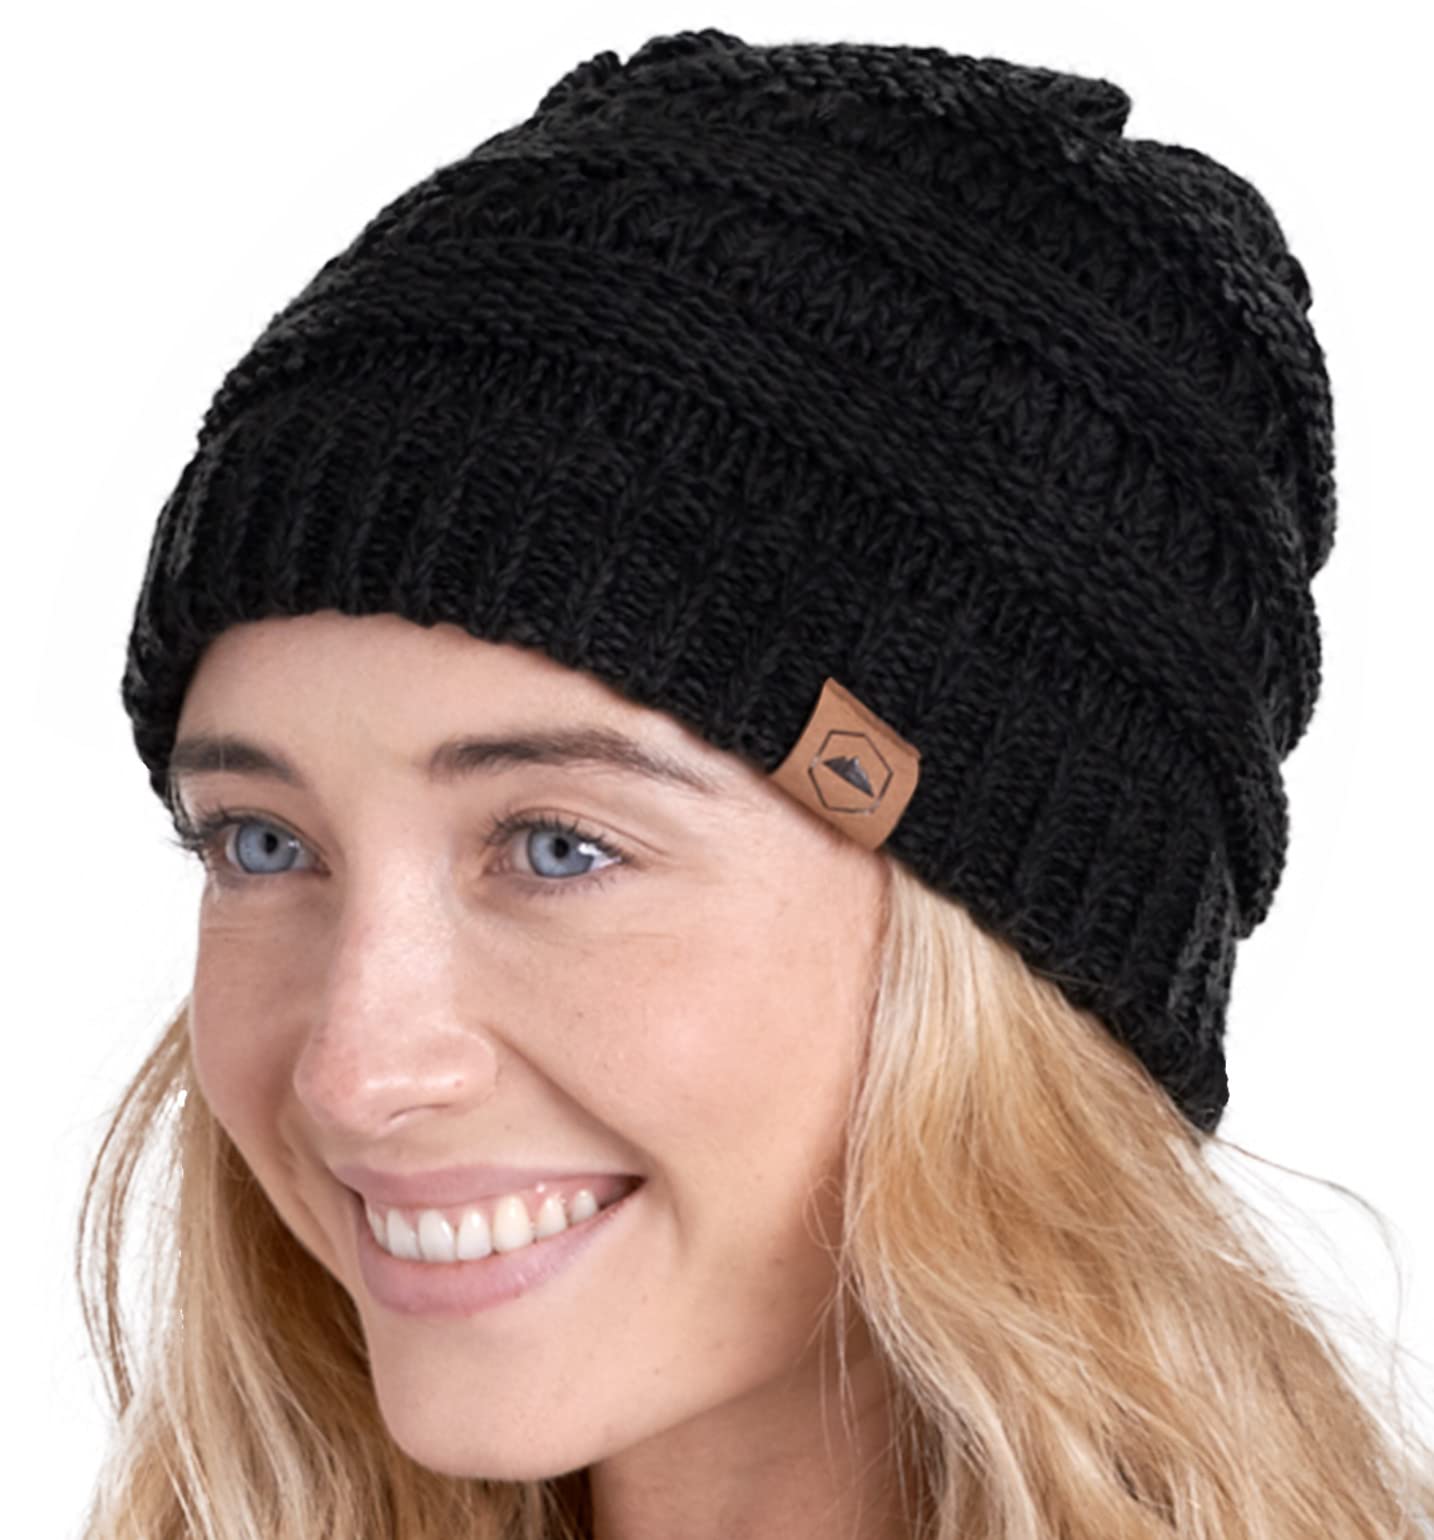 Tough Headwear Womens Beanie Winter Hat - Warm Chunky Cable Knit Hats - Soft Stretch Thick Cute Knitted Cap for Cold Weather